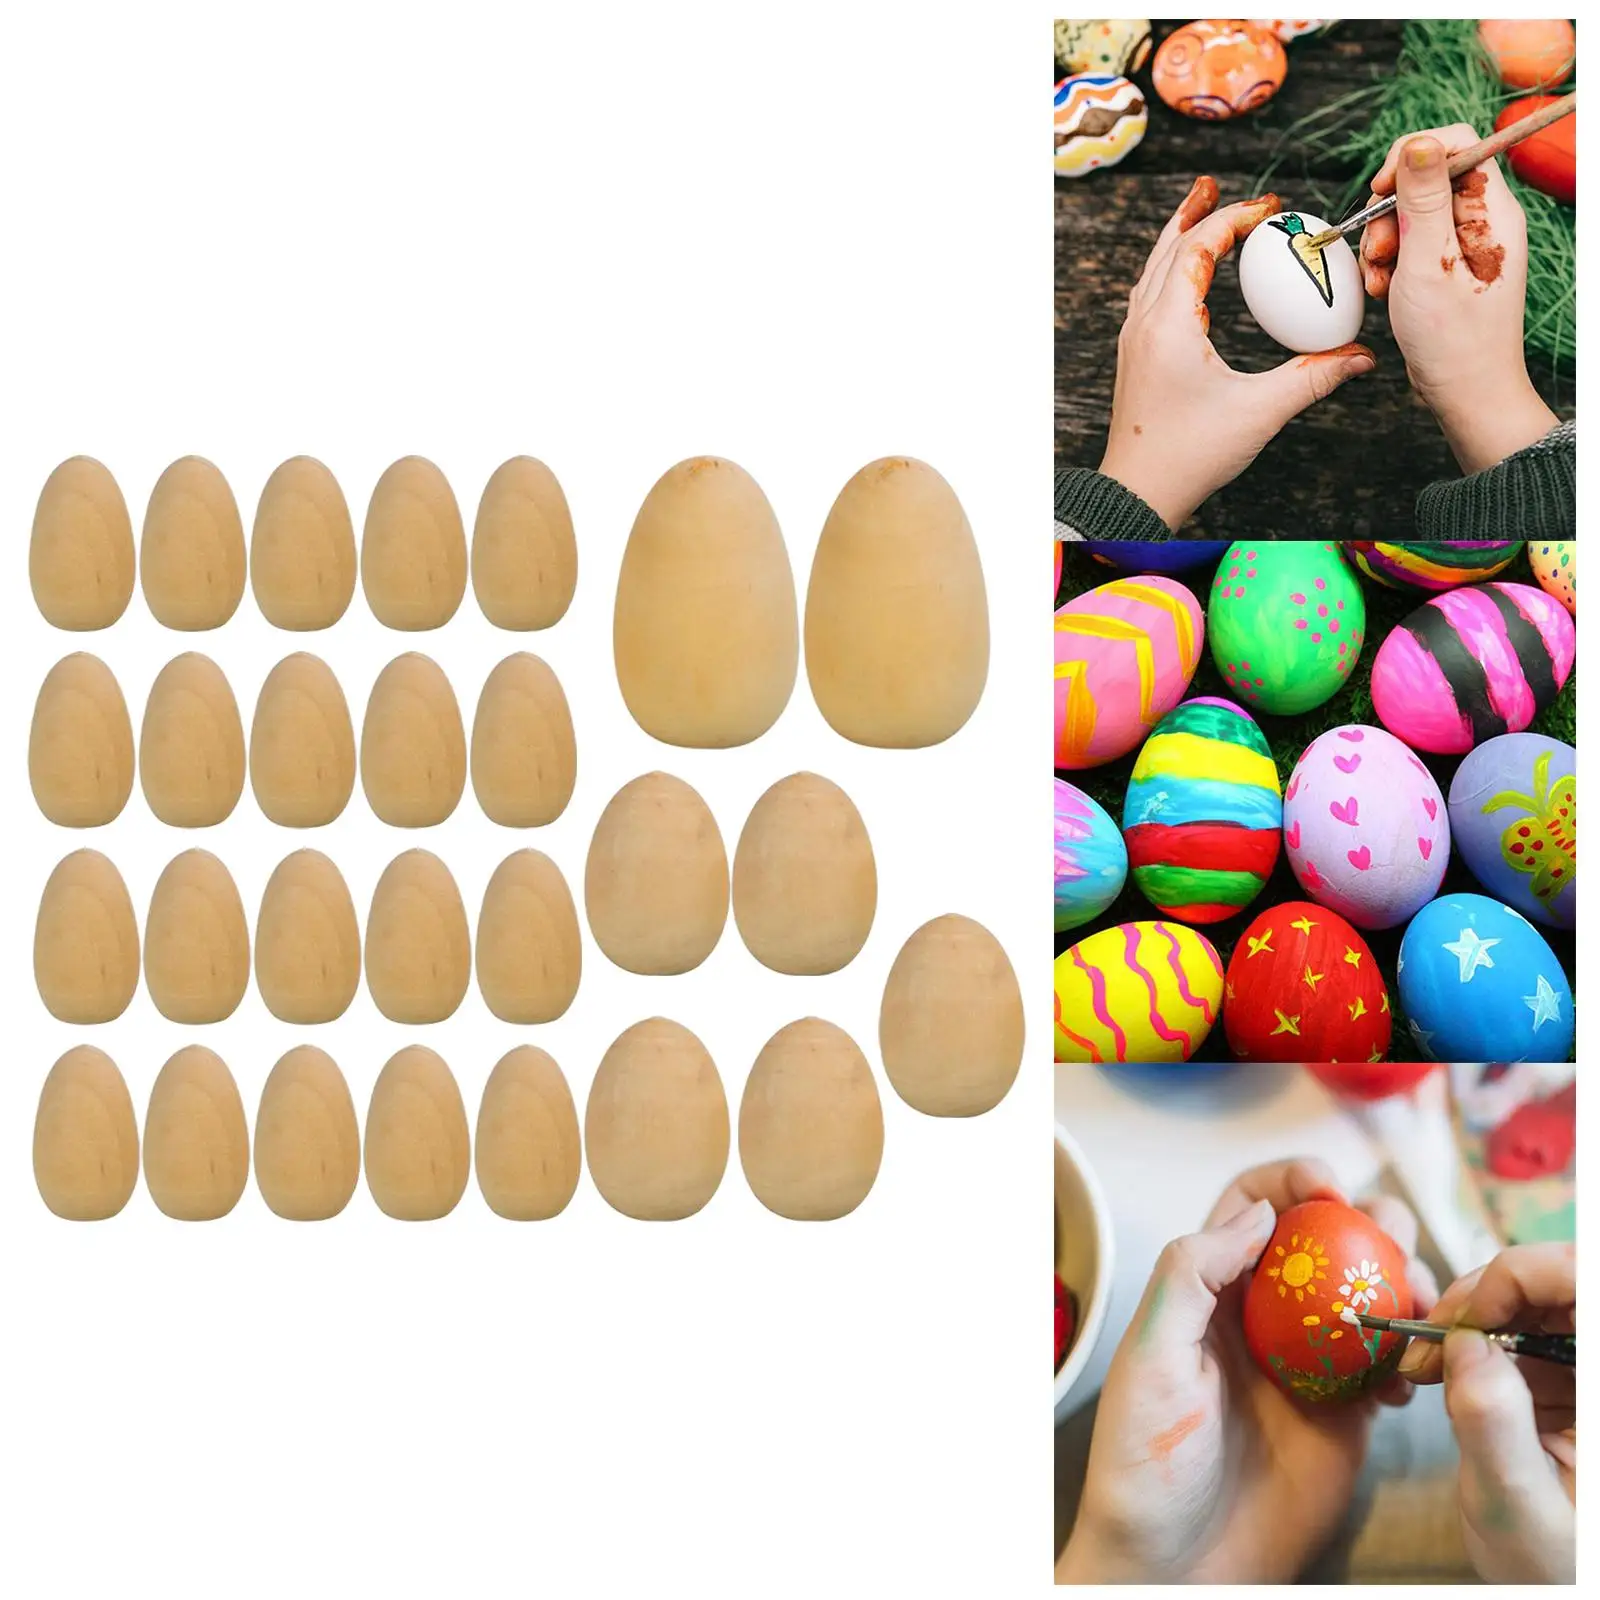 27 Pieces Wooden Blank Eggs Fake Eggs Unfinished Wood Eggs with Flat Bottom for DIY Easter Holiday Craft Ornament